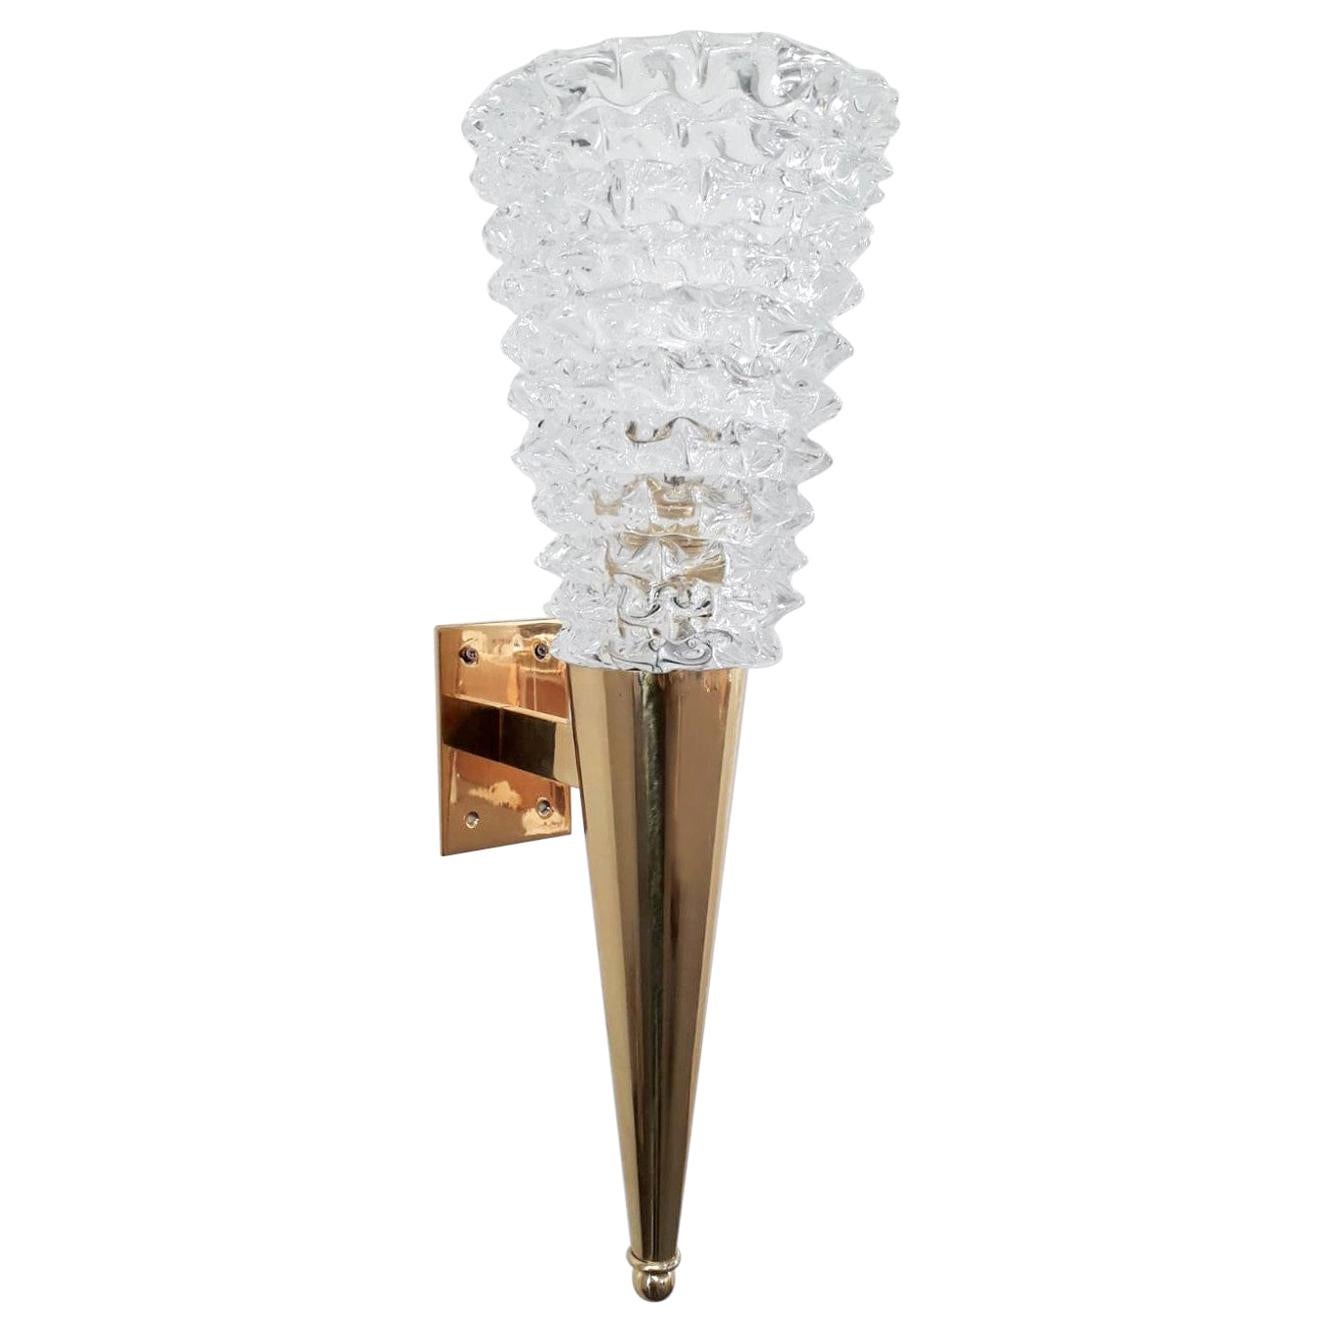 Single Torchere Sconce by Barovier e Toso